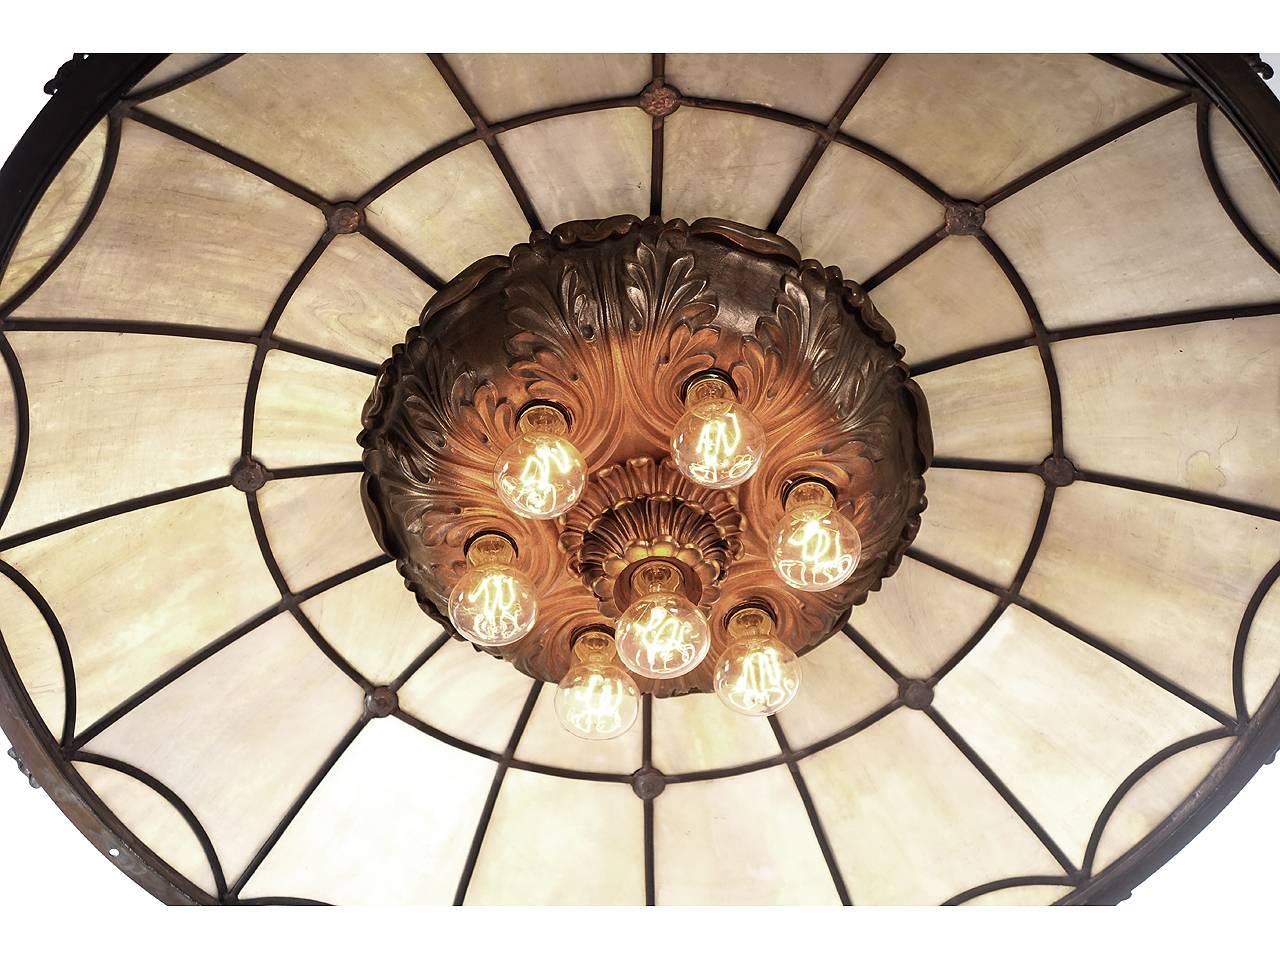 This is as elegant as it gets. The layered casting has seven bulbs and is heavy bronze. The skylight style domed shade is almost 3 foot in diameter with an cream/amber leaded glass and cast bronze details. The quality looks as if it was created by